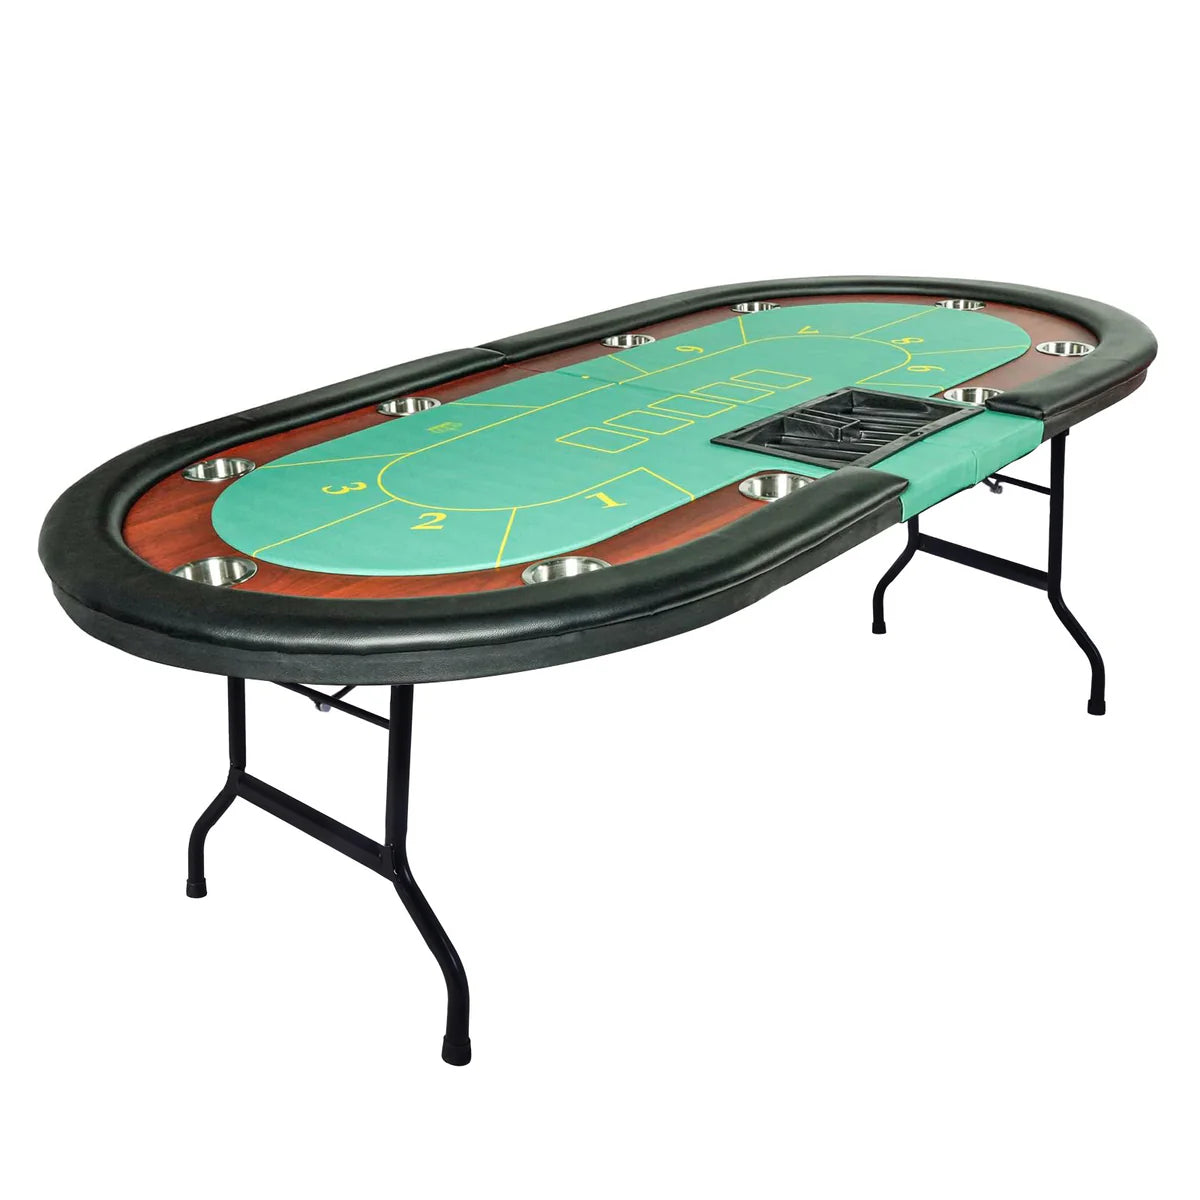 84" Folding Poker Table 10 Player Card Table with 10 Cup Holder for Texas Casino